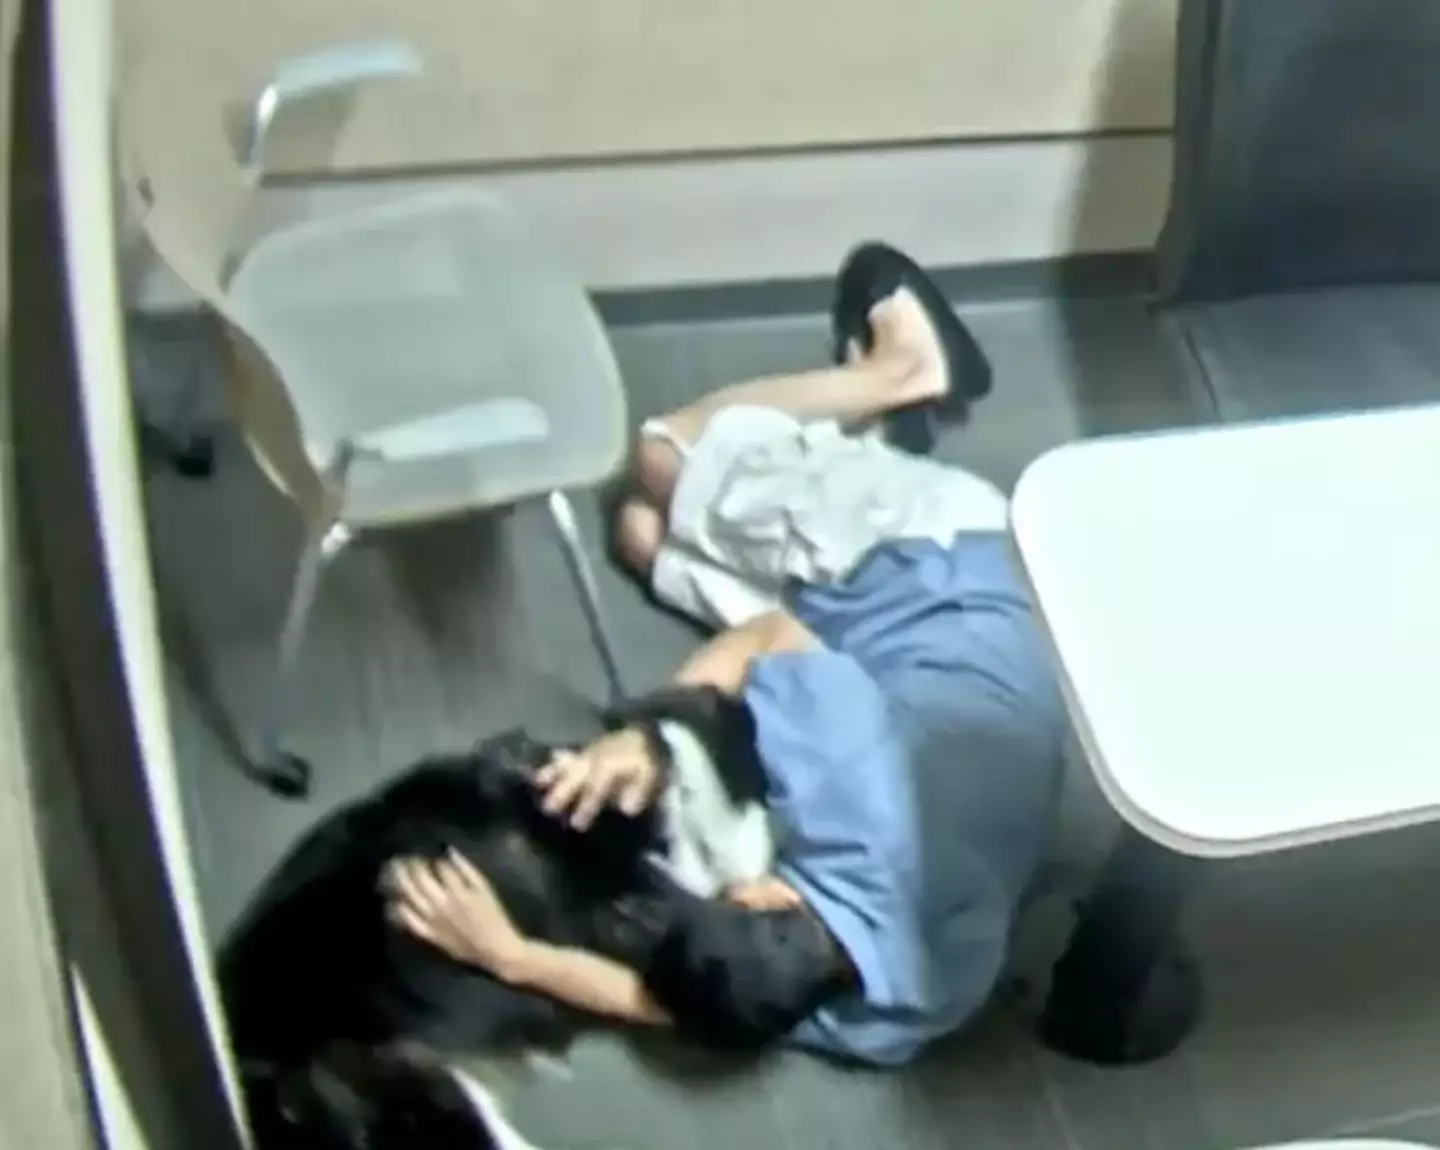 Perez lay down with his dog during the interrogation. (Fontana Police)